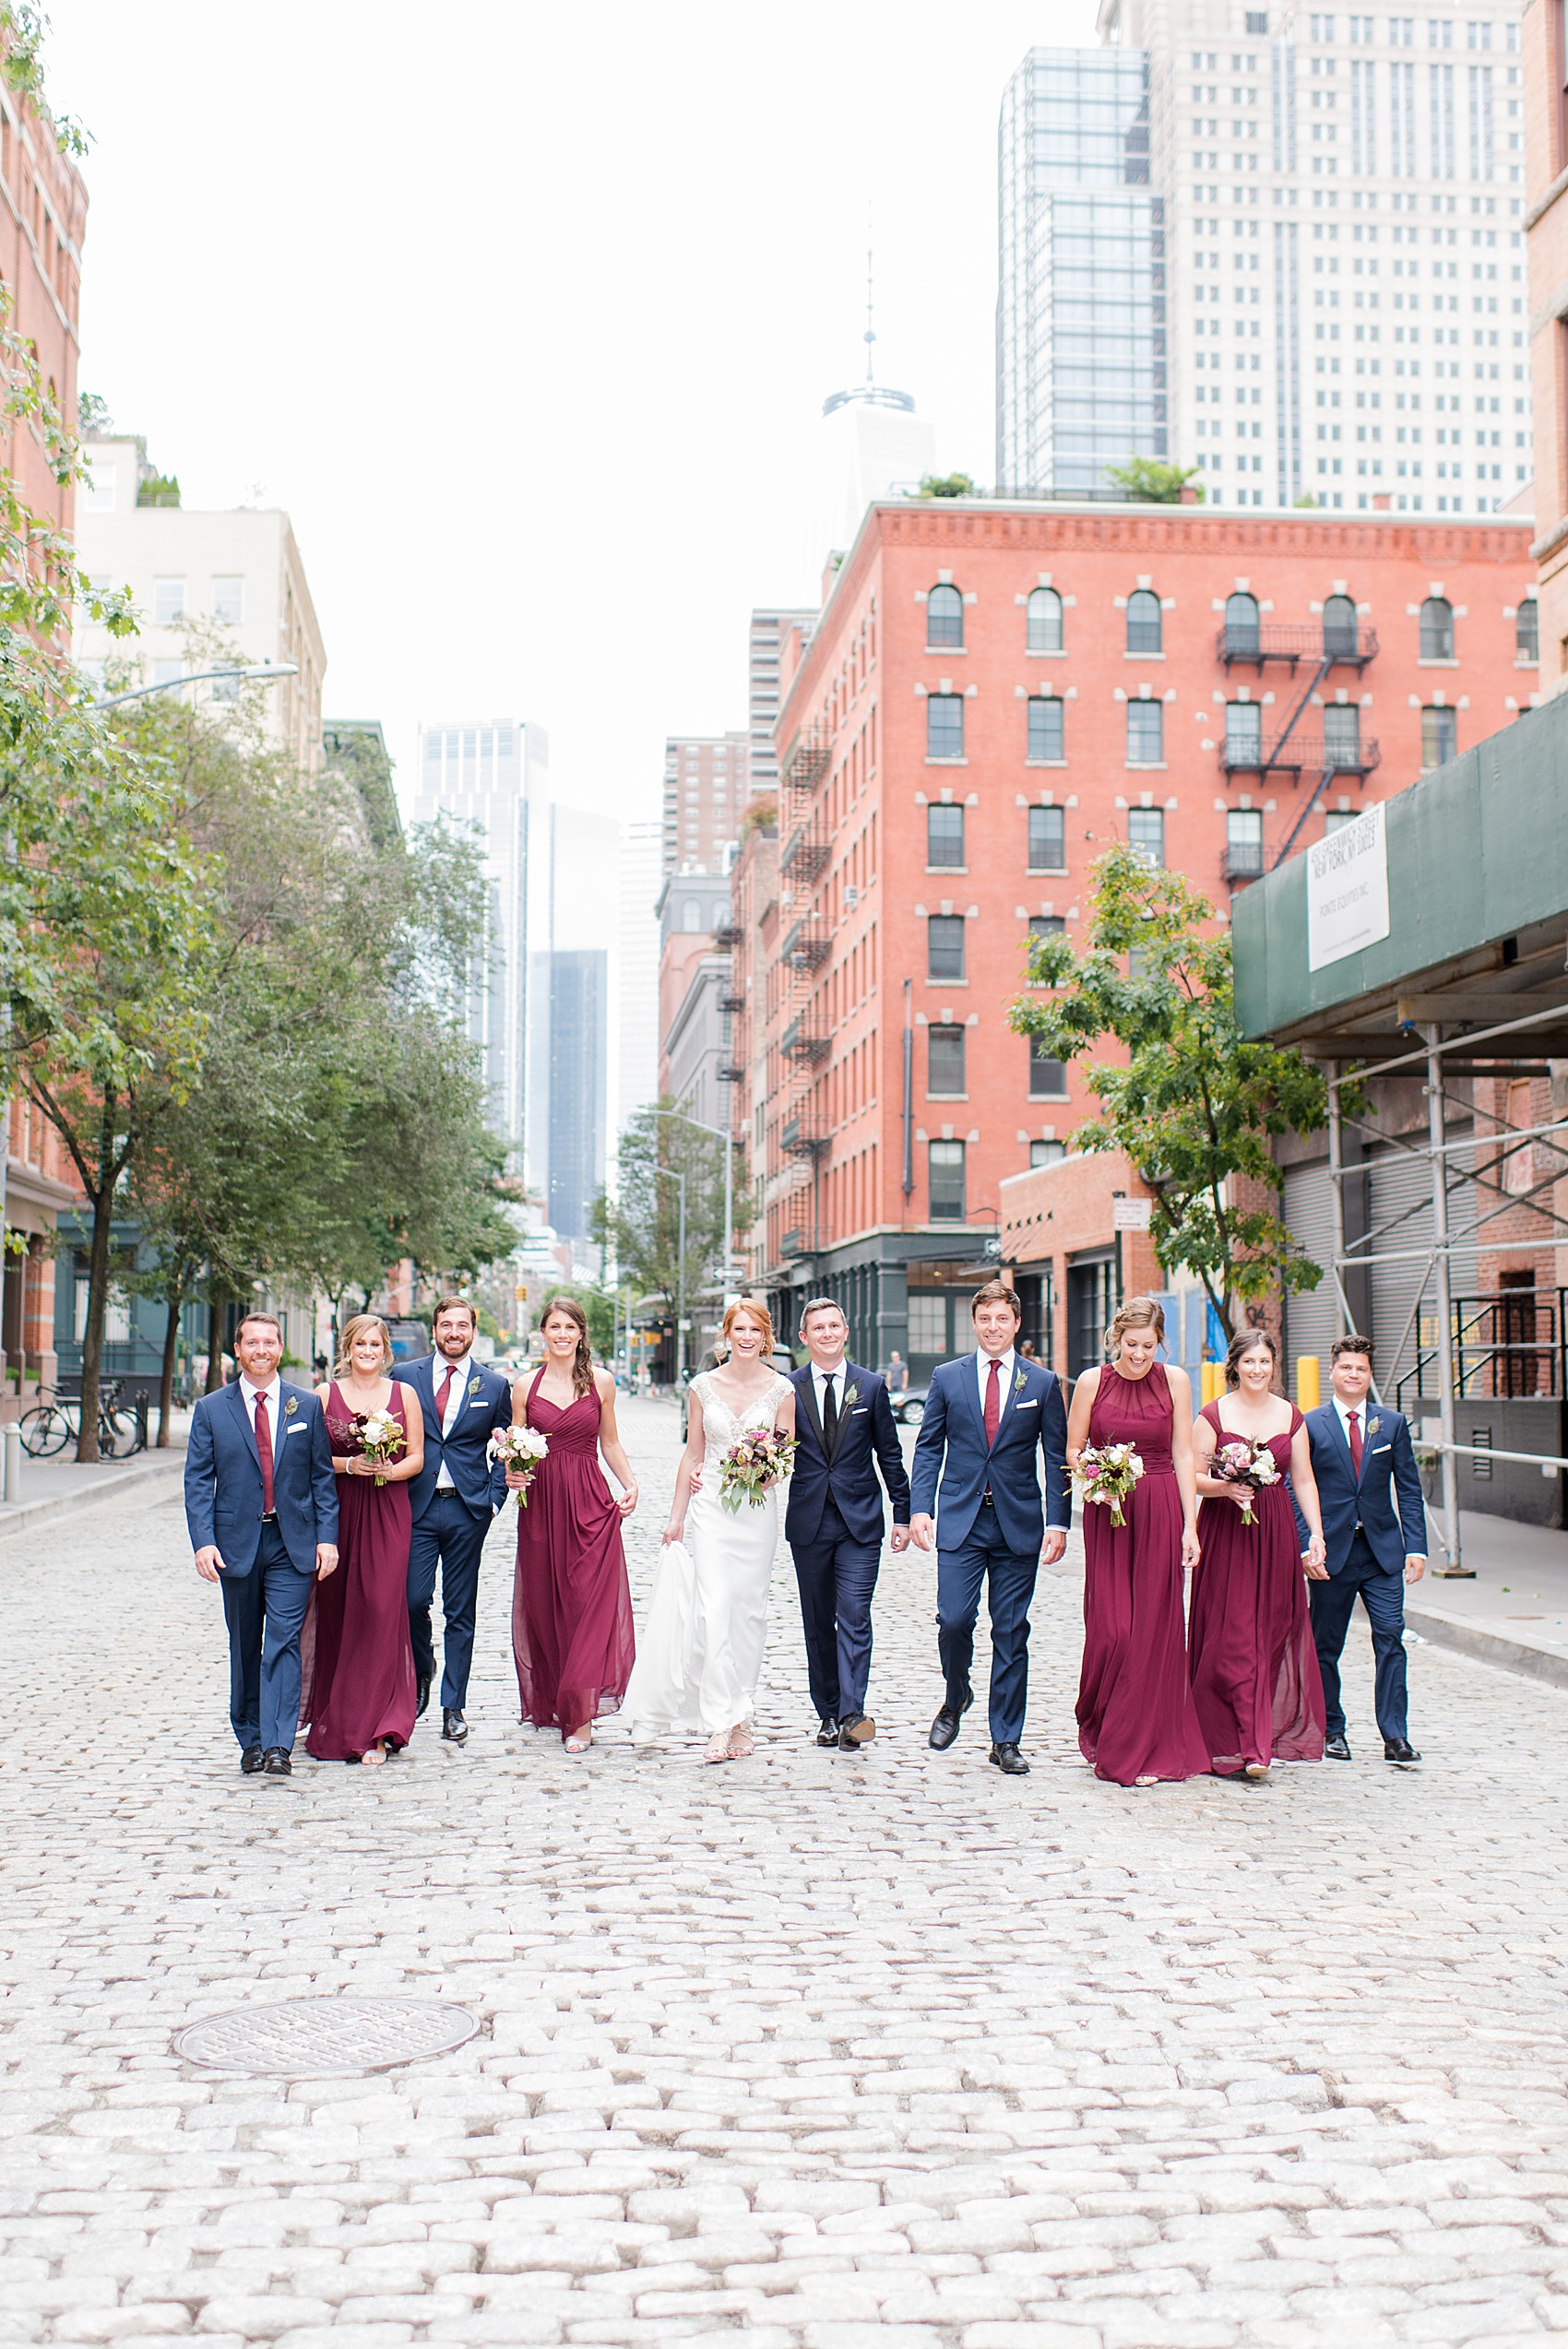 Wedding photos at Tribeca Rooftop by Mikkel Paige Photography, in NYC. This Manhattan venue has the perfect view of the New York City skyline including Freedom Tower. The bridal party walked along the cobblestone streets in the city for this fun photo. #ManhattanWedding #TribecaRooftop #TribecaRooftopWeddingPhotos #SeptemberWedding #Groom #MikkelPaige #WeddingPhotos #Groomsmen #BridalParty #cobblestoneweddingphotos #RedBridesmaids #CranberryBridesmaids #RedWeddingInspiration #BerryWeddingInspiration